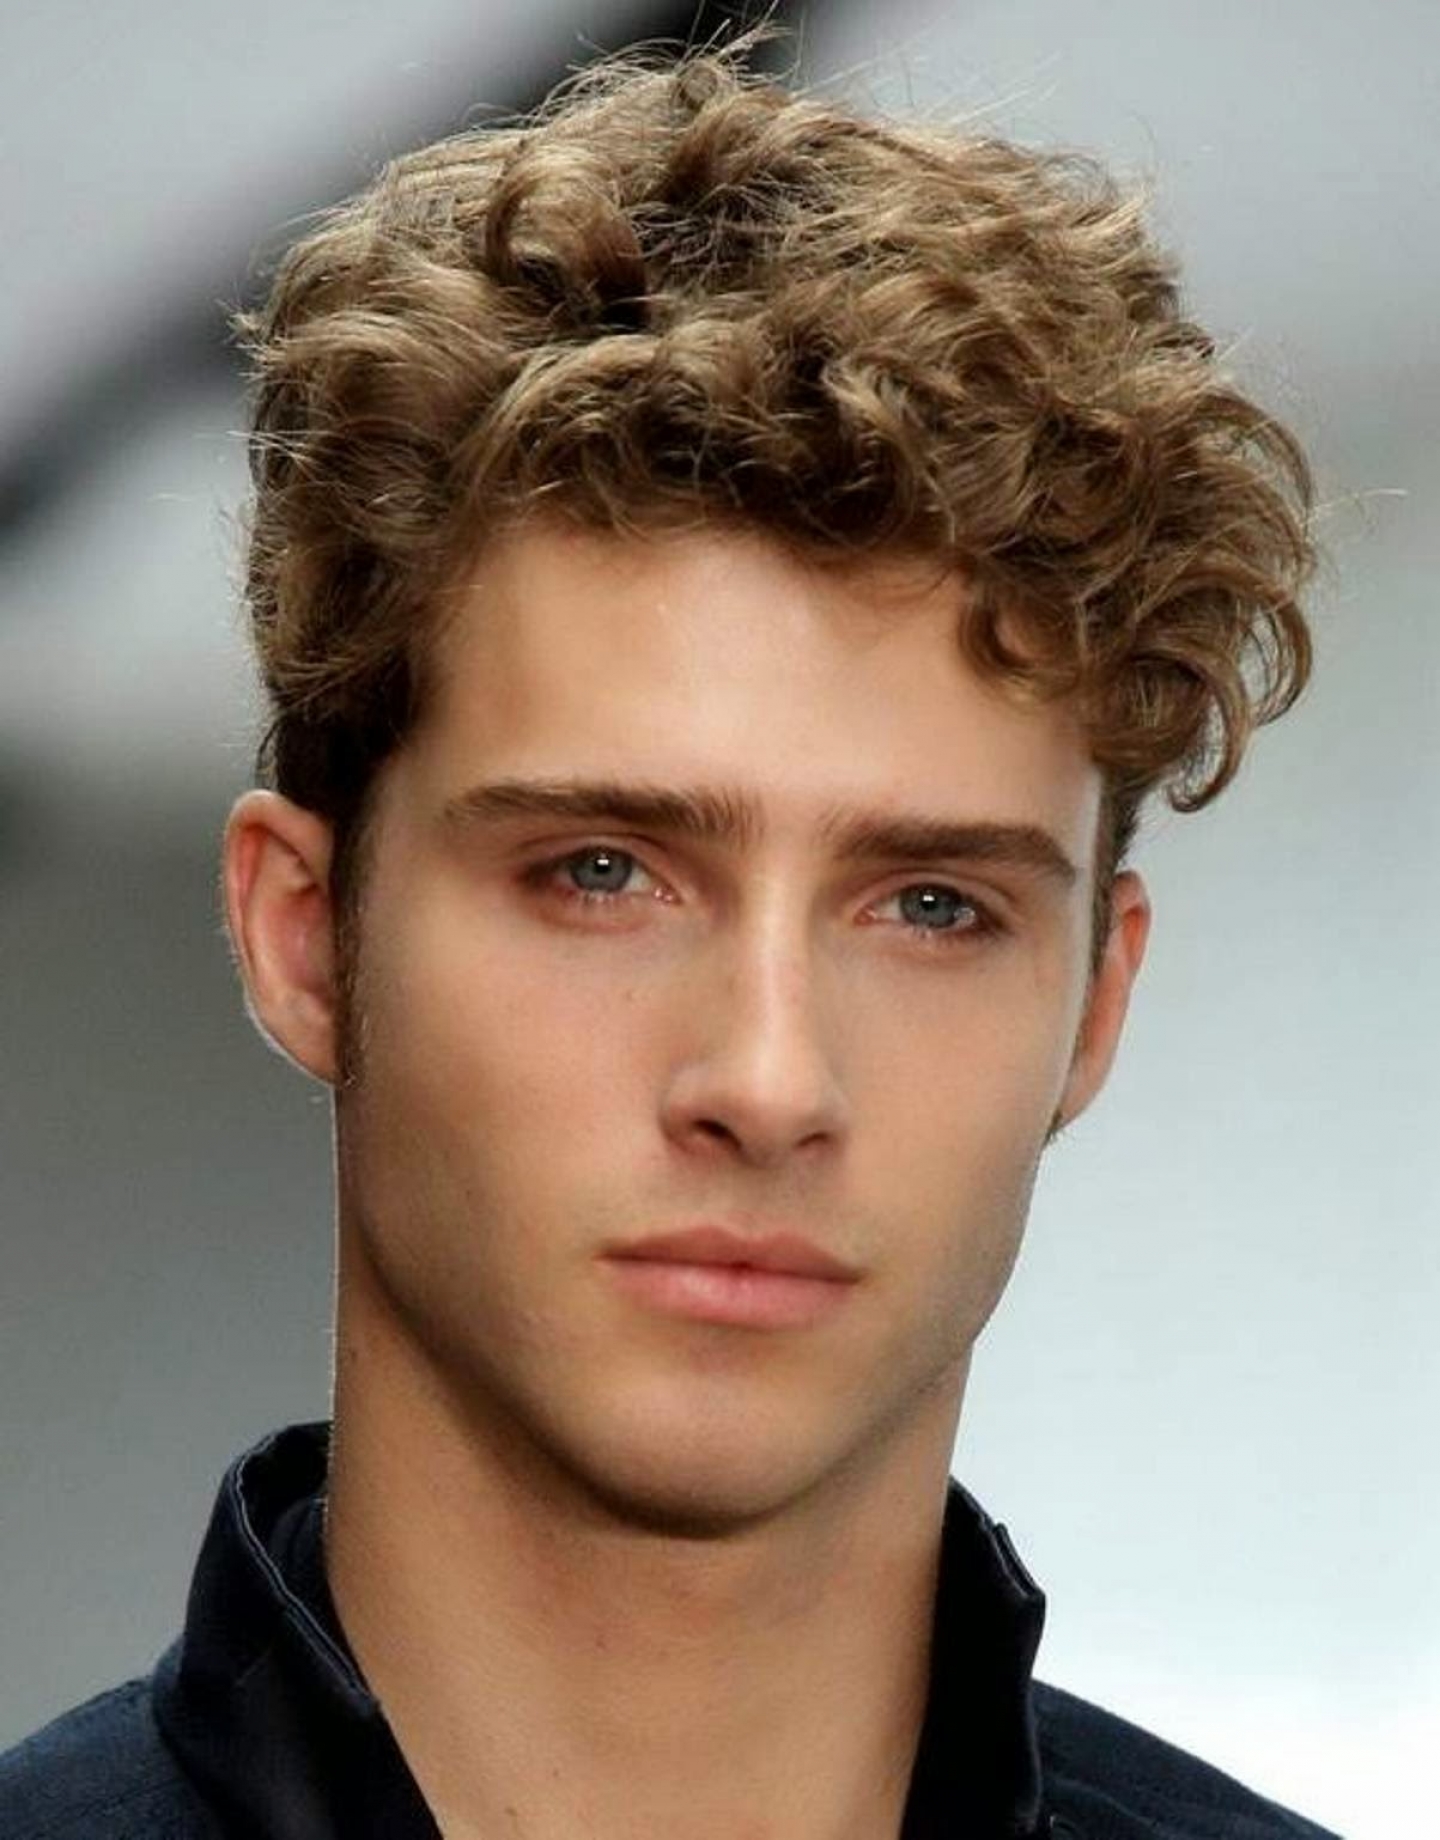 20 Mens Hairstyles Ideas with Pictures - MagMent